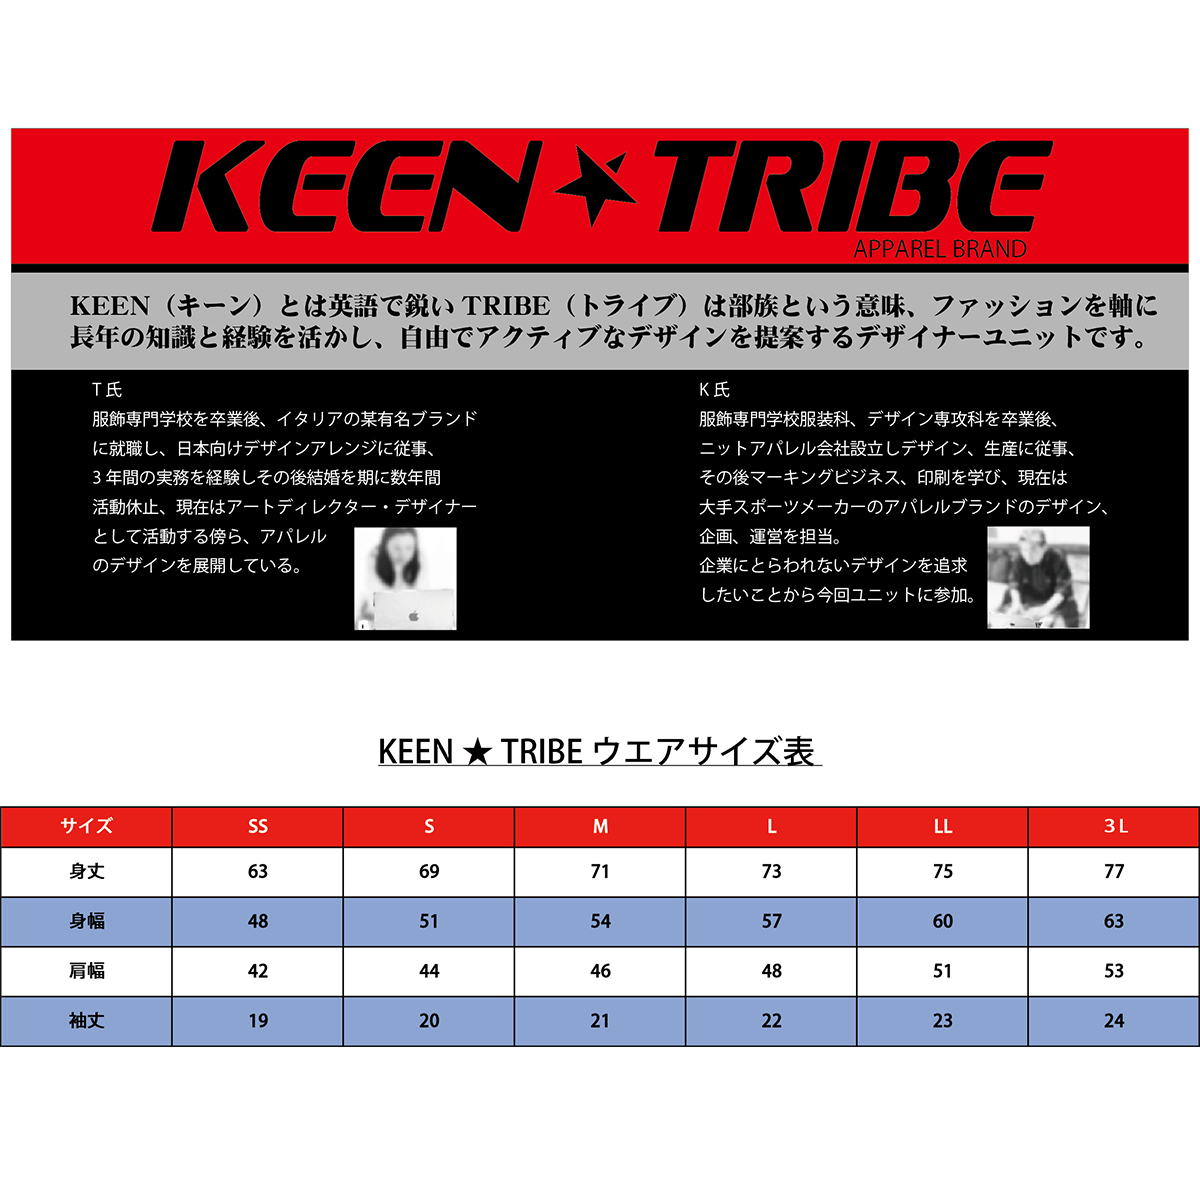 KEEN ★ TRIBE　KT-33(受注生産)